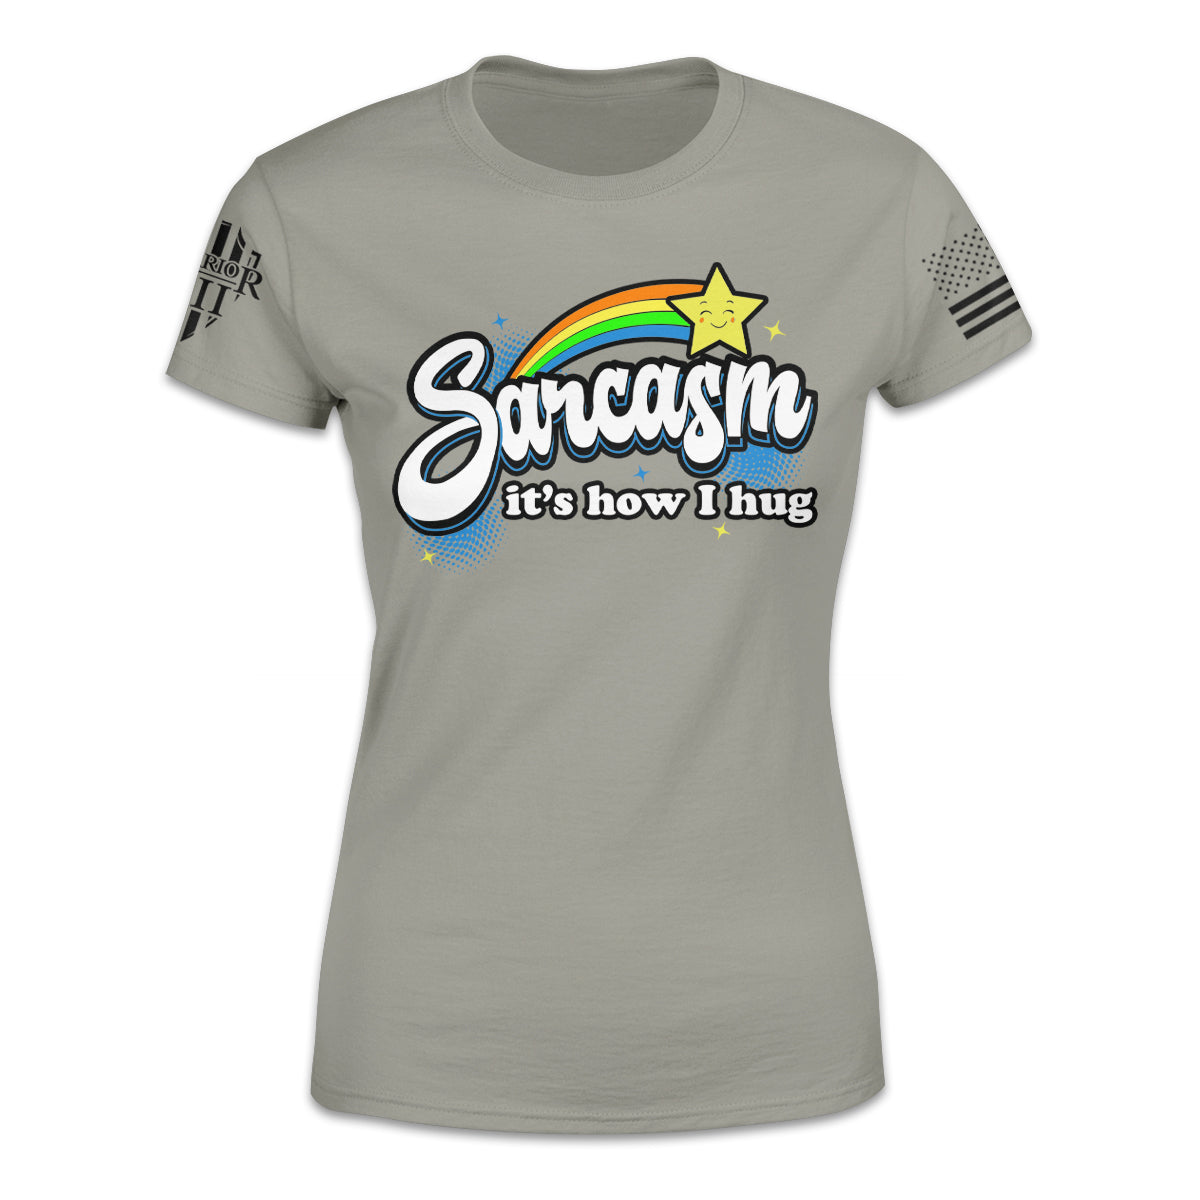 A grey women's relaxed fit shirt with the words "Sarcasm; it's how I hug" with a rainbow and shooting star printed on the front of the shirt.